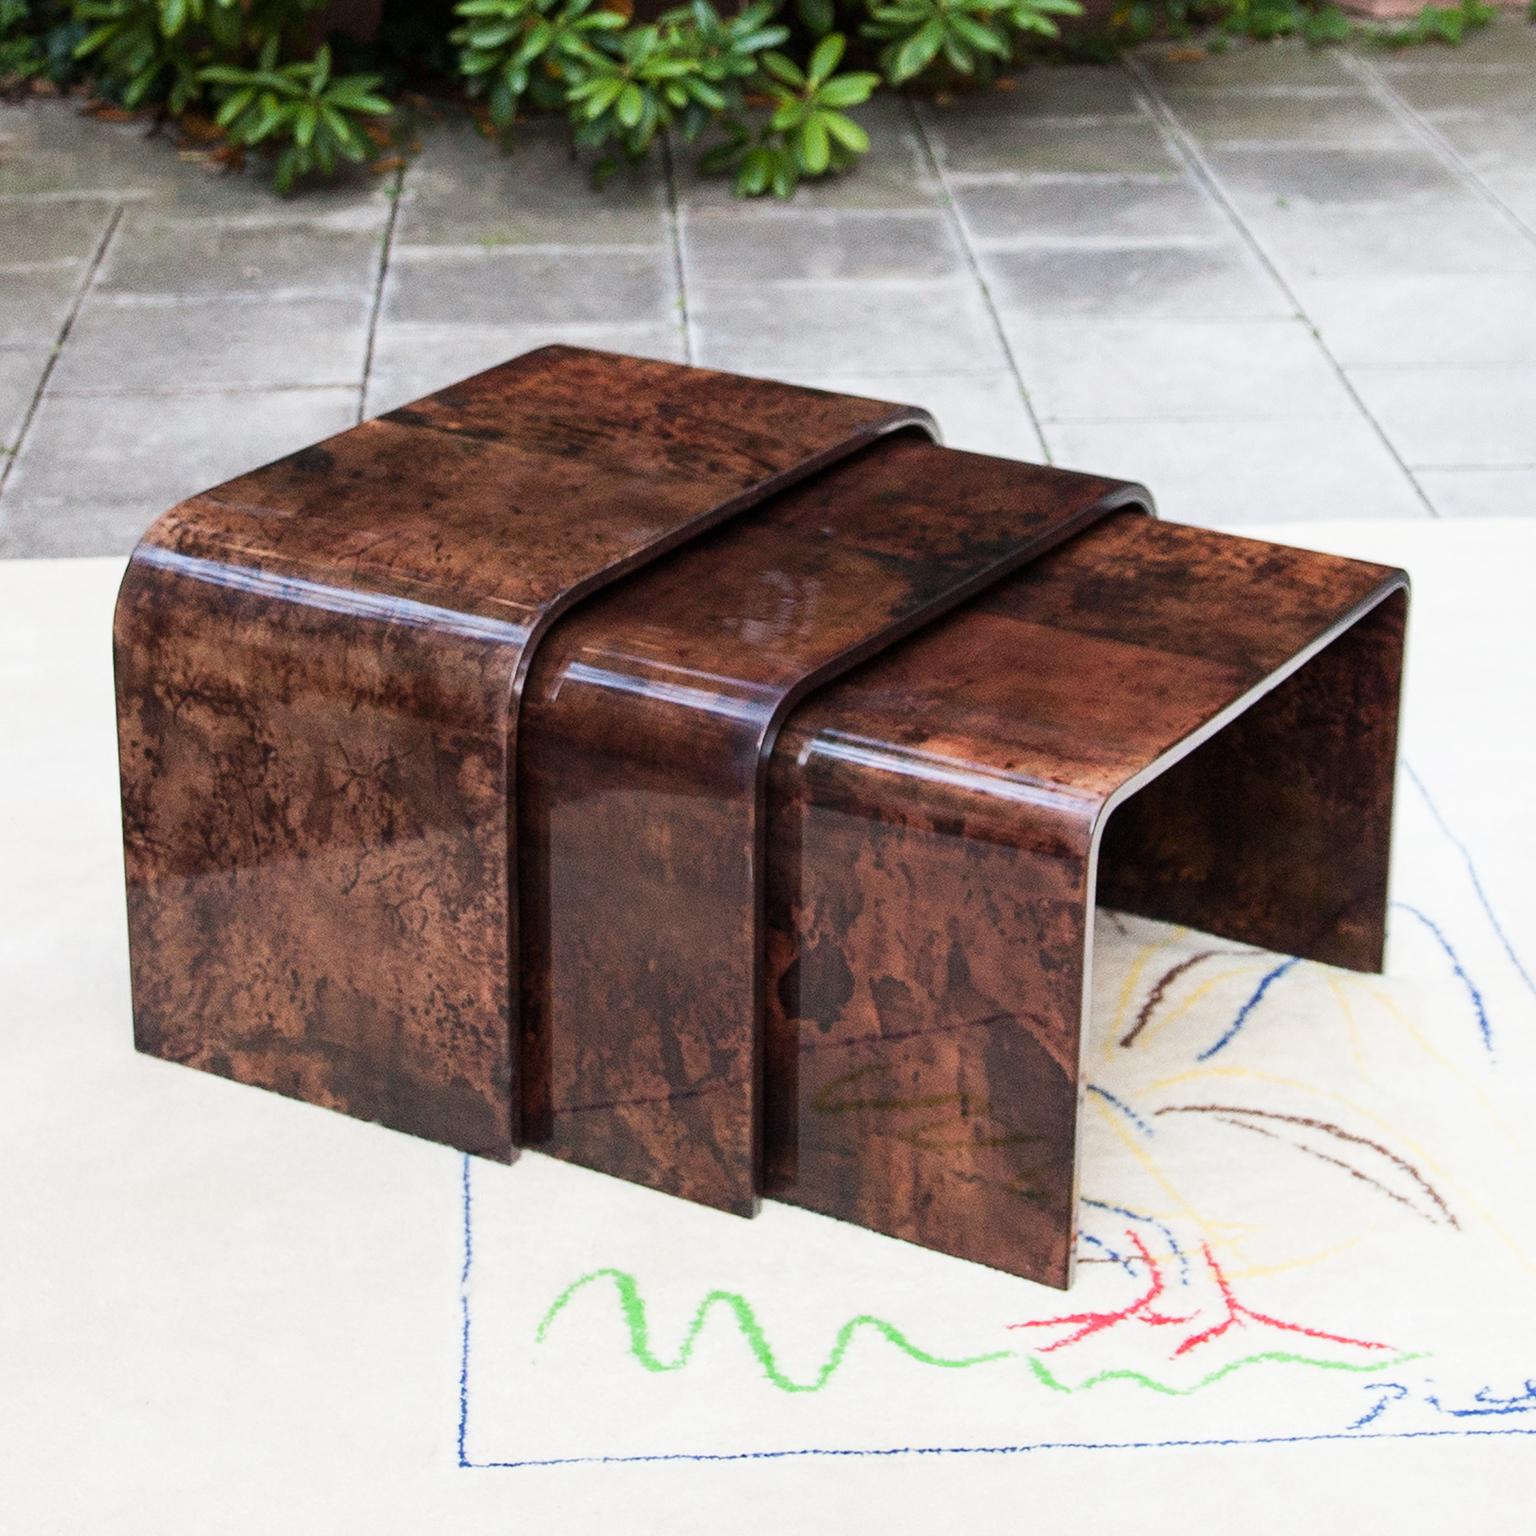 Set of three Aldo Tura nesting tables in brown lacquered goatskin and executed circa 1975 in a somewhat soft style, but – as strong contrast – is covered with a brown tanned parchment. Along with artists like Piero Fornasetti and Carlo Bugatti, Aldo